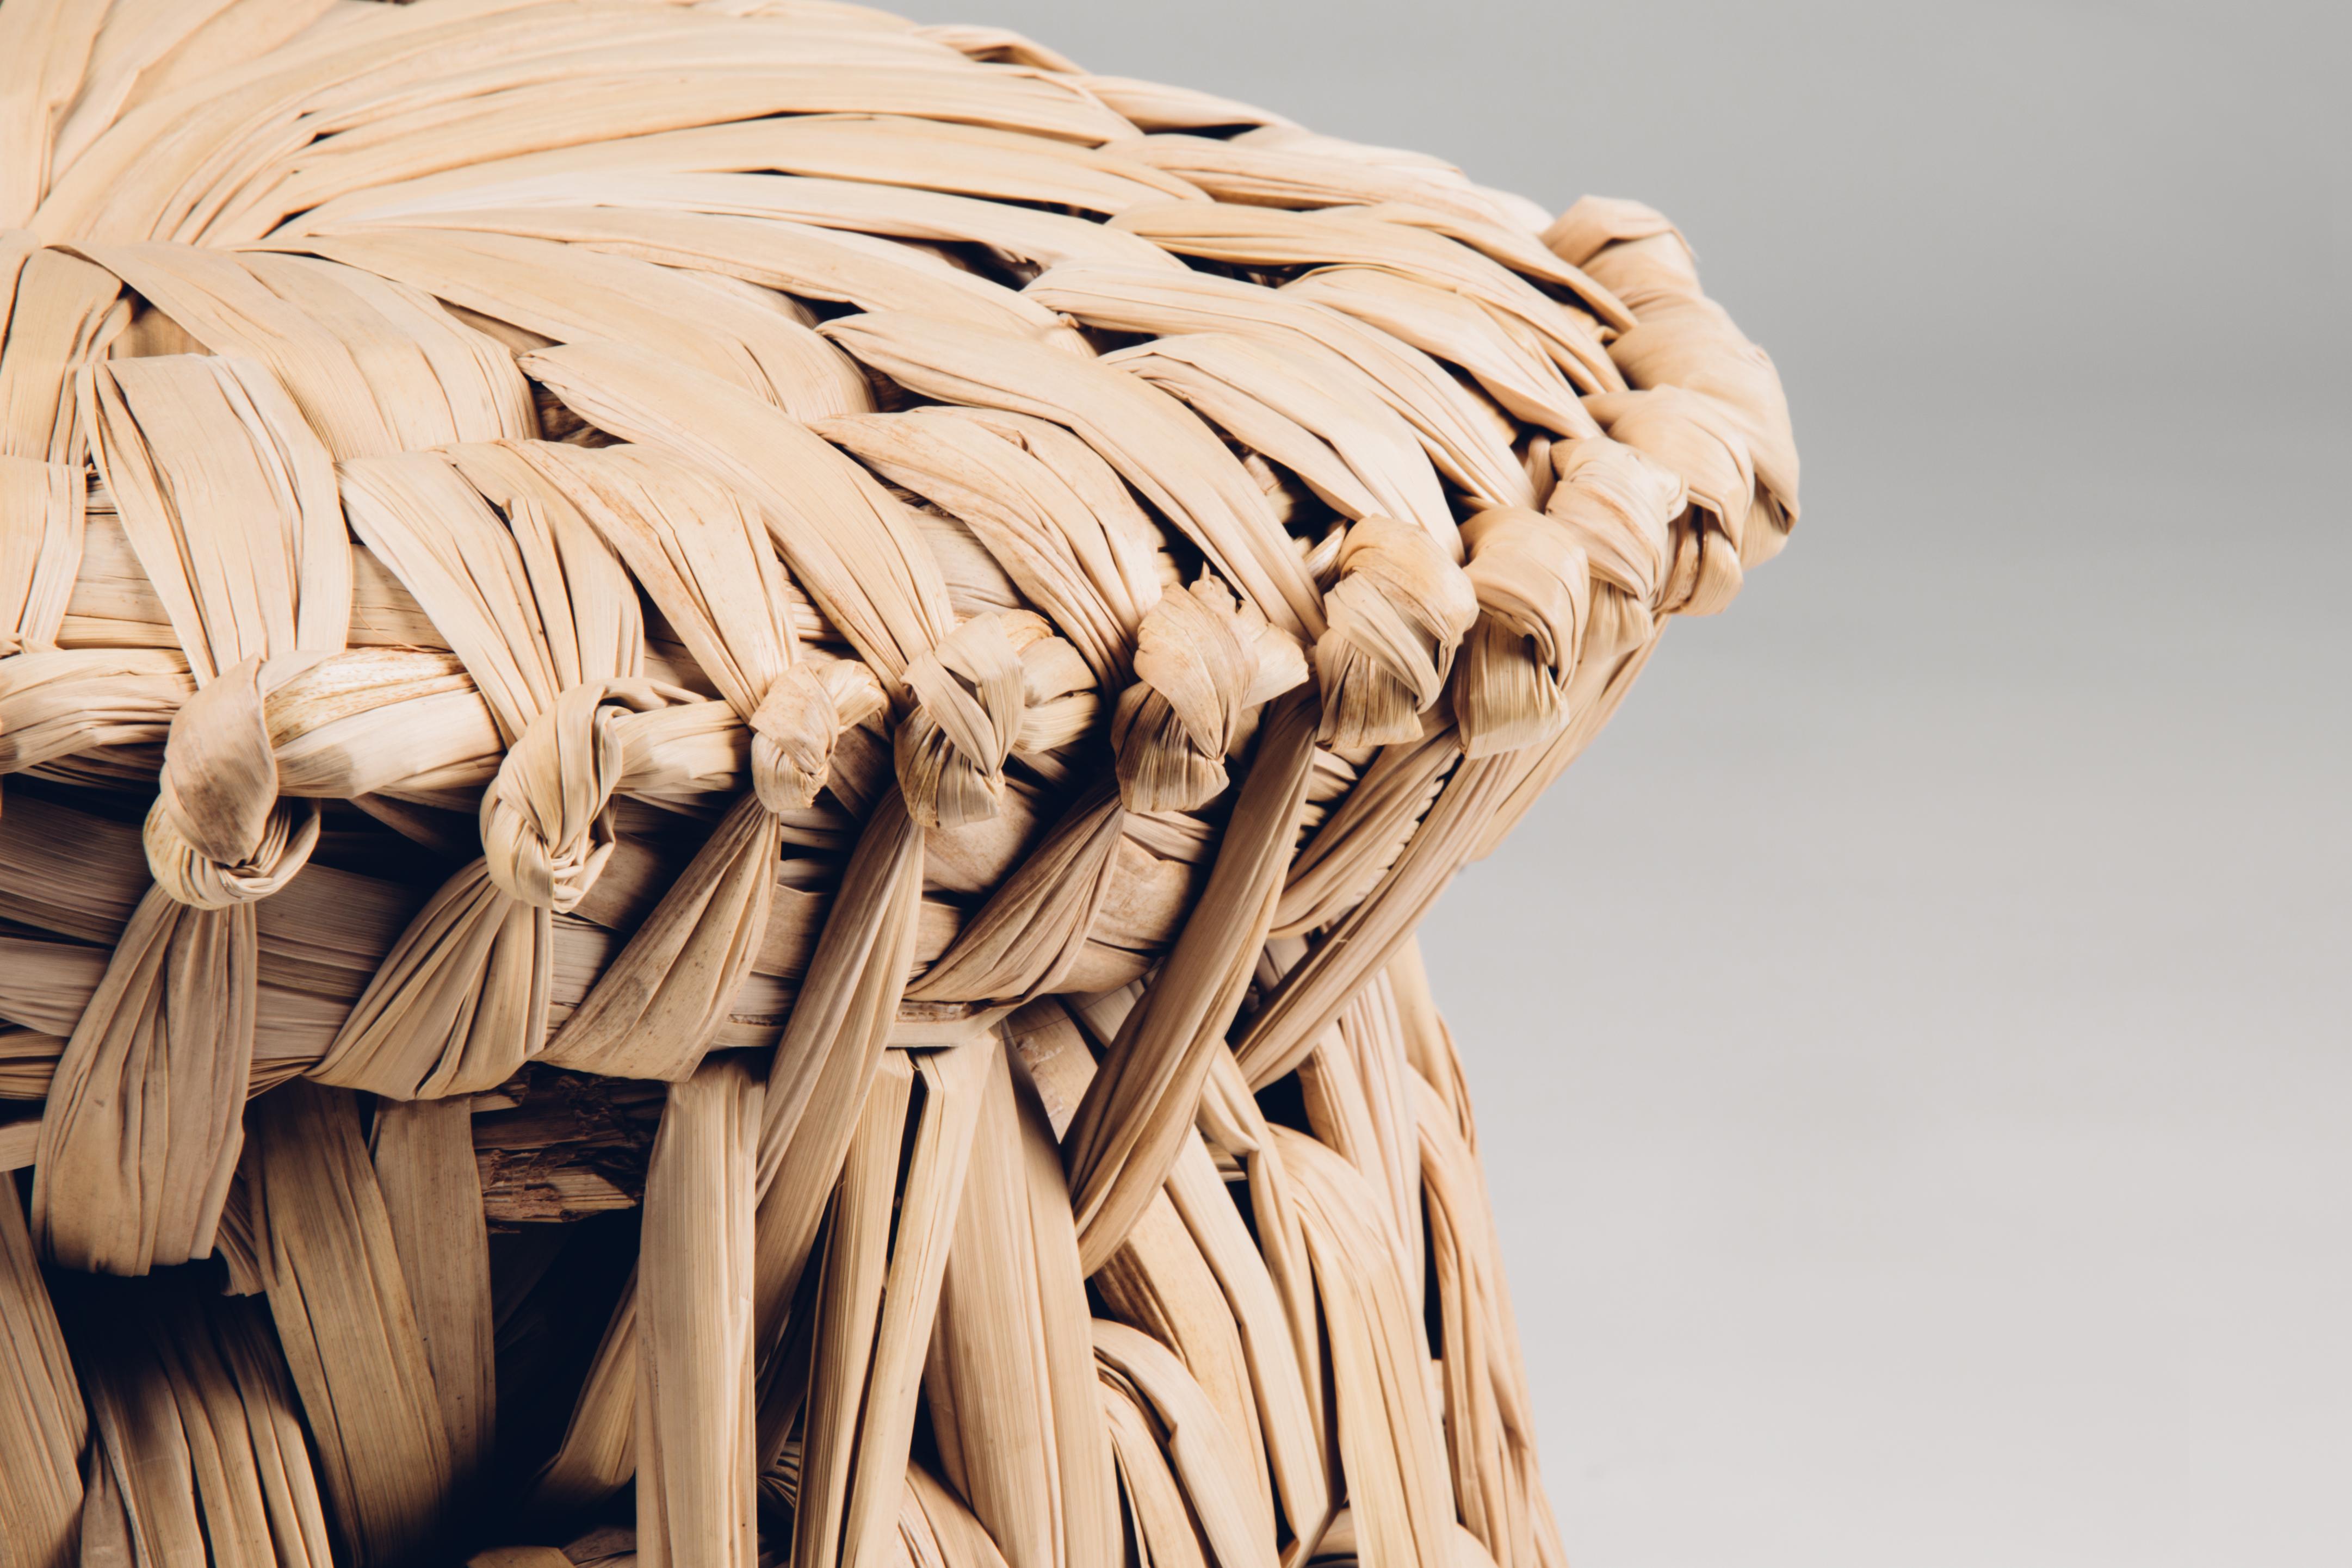 Hand-Woven Handwoven Palm 'Icpalli' Large Stool, made in Mexico from LUTECA